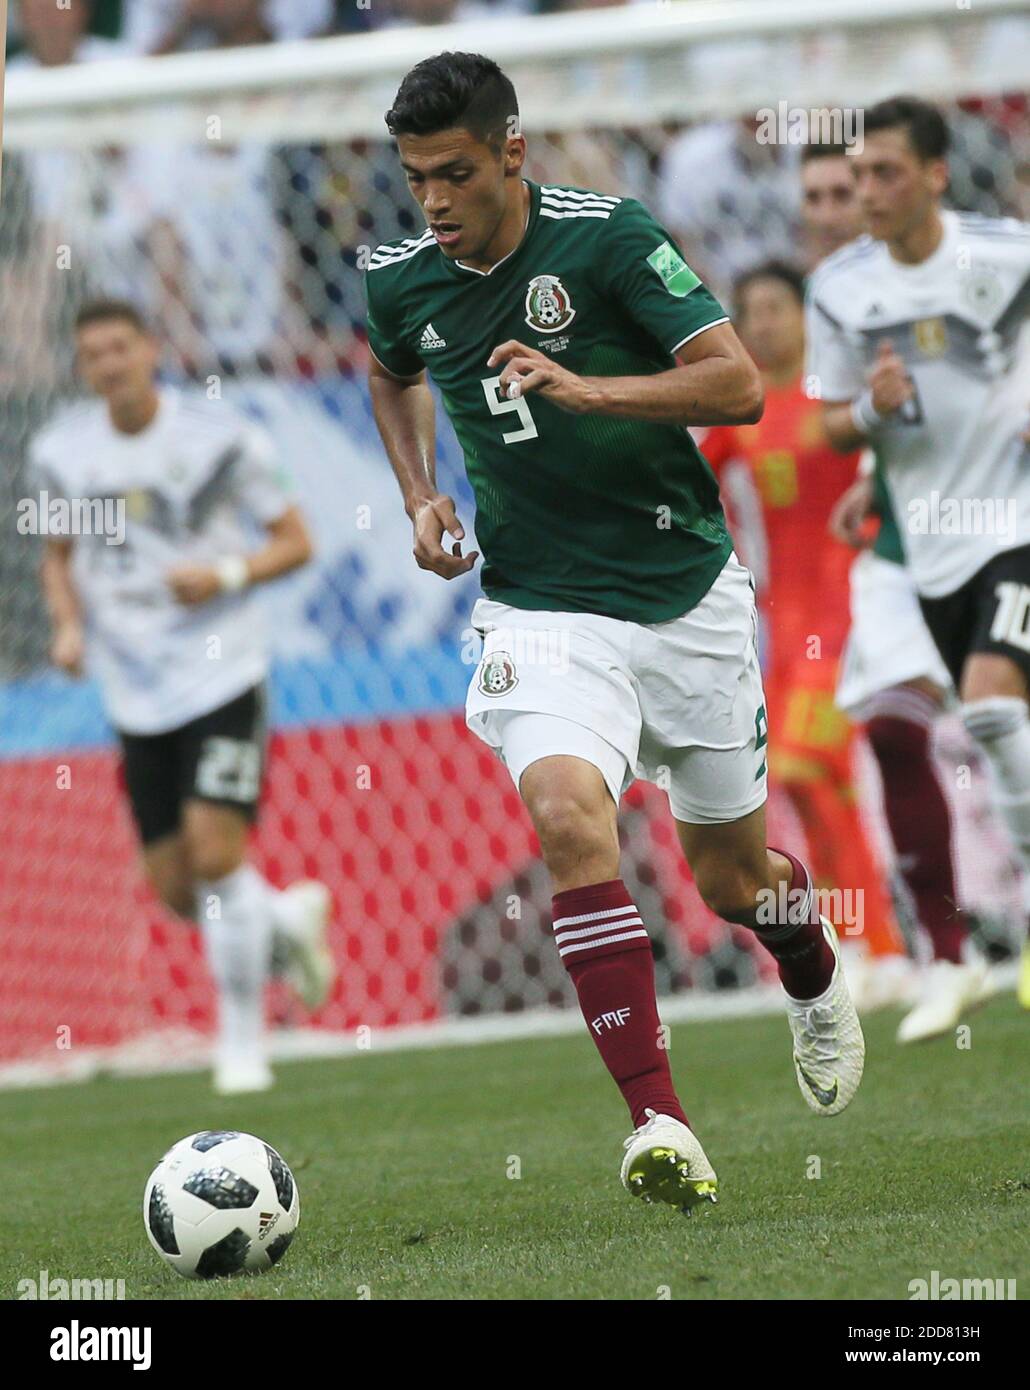 Raul Jimenez of Mexico during the 2018 FIFA World Cup Russia game, Germany vs Mexico in Luzhniky Stadium, Moscow, Russia on June 17, 2018. Mexico won 1-0. Photo by Giuliano Bevilacqua/ABACAPRESS.COM Stock Photo